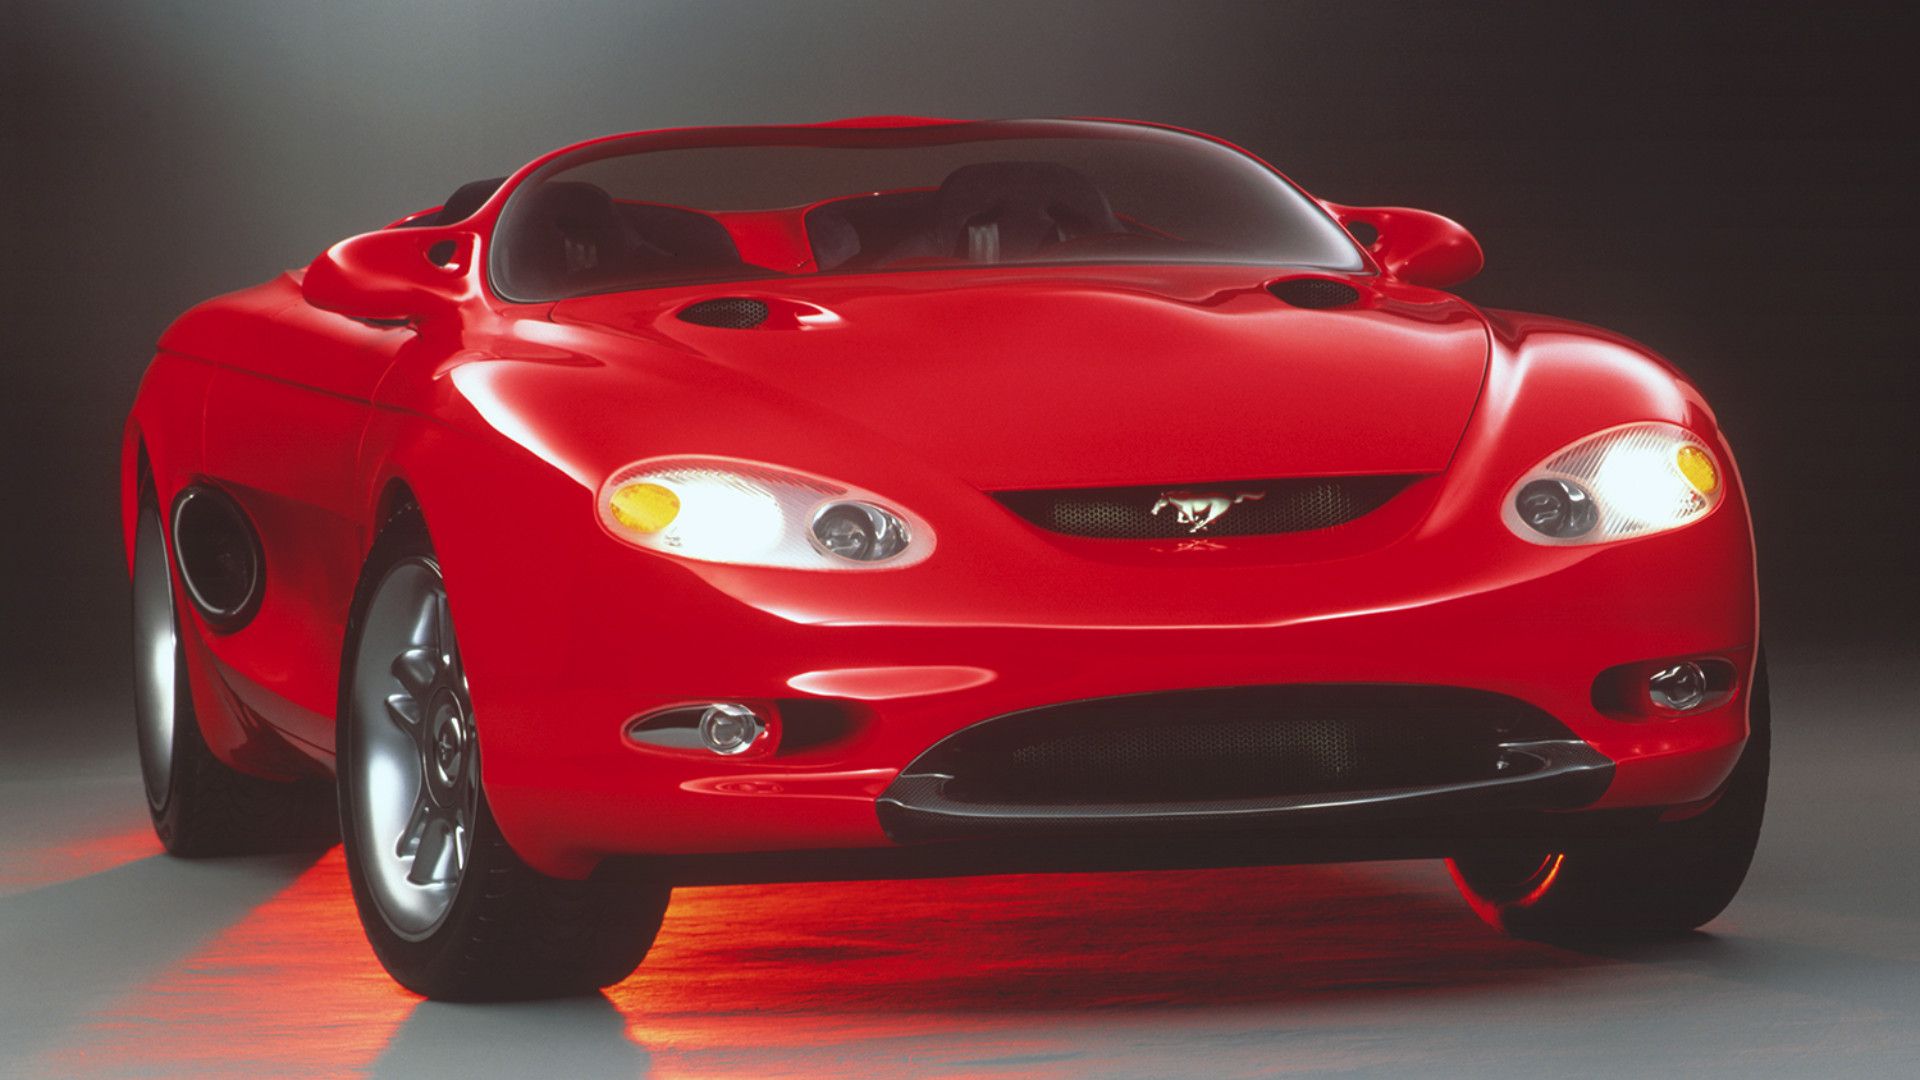 10 Stunning Mustang Concepts Every Muscle Car Fan Should Know About